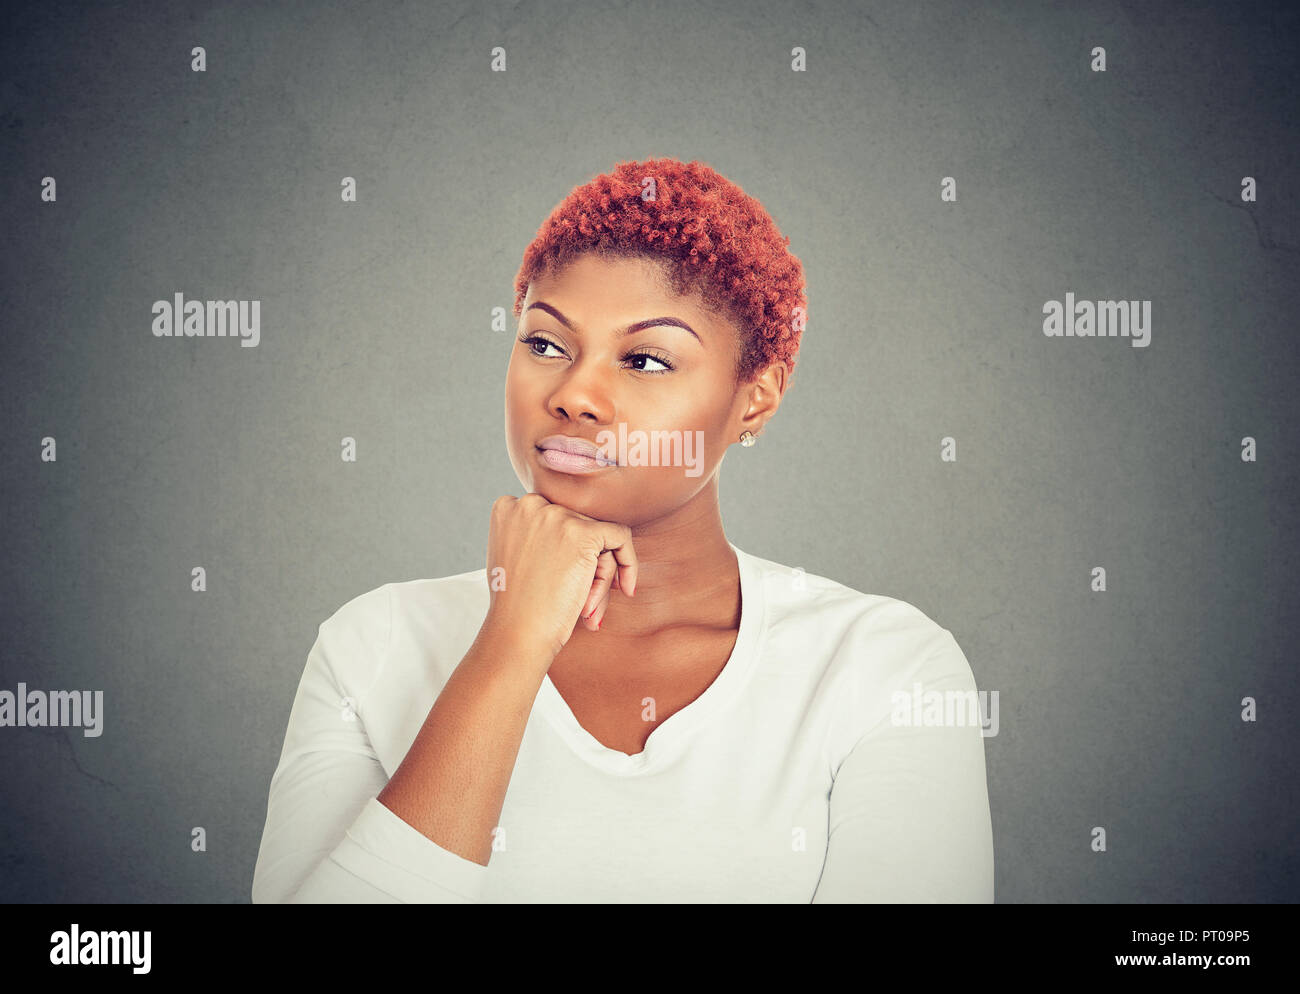 Woman thinking. Portrait of a serious beautiful young woman looking away Stock Photo